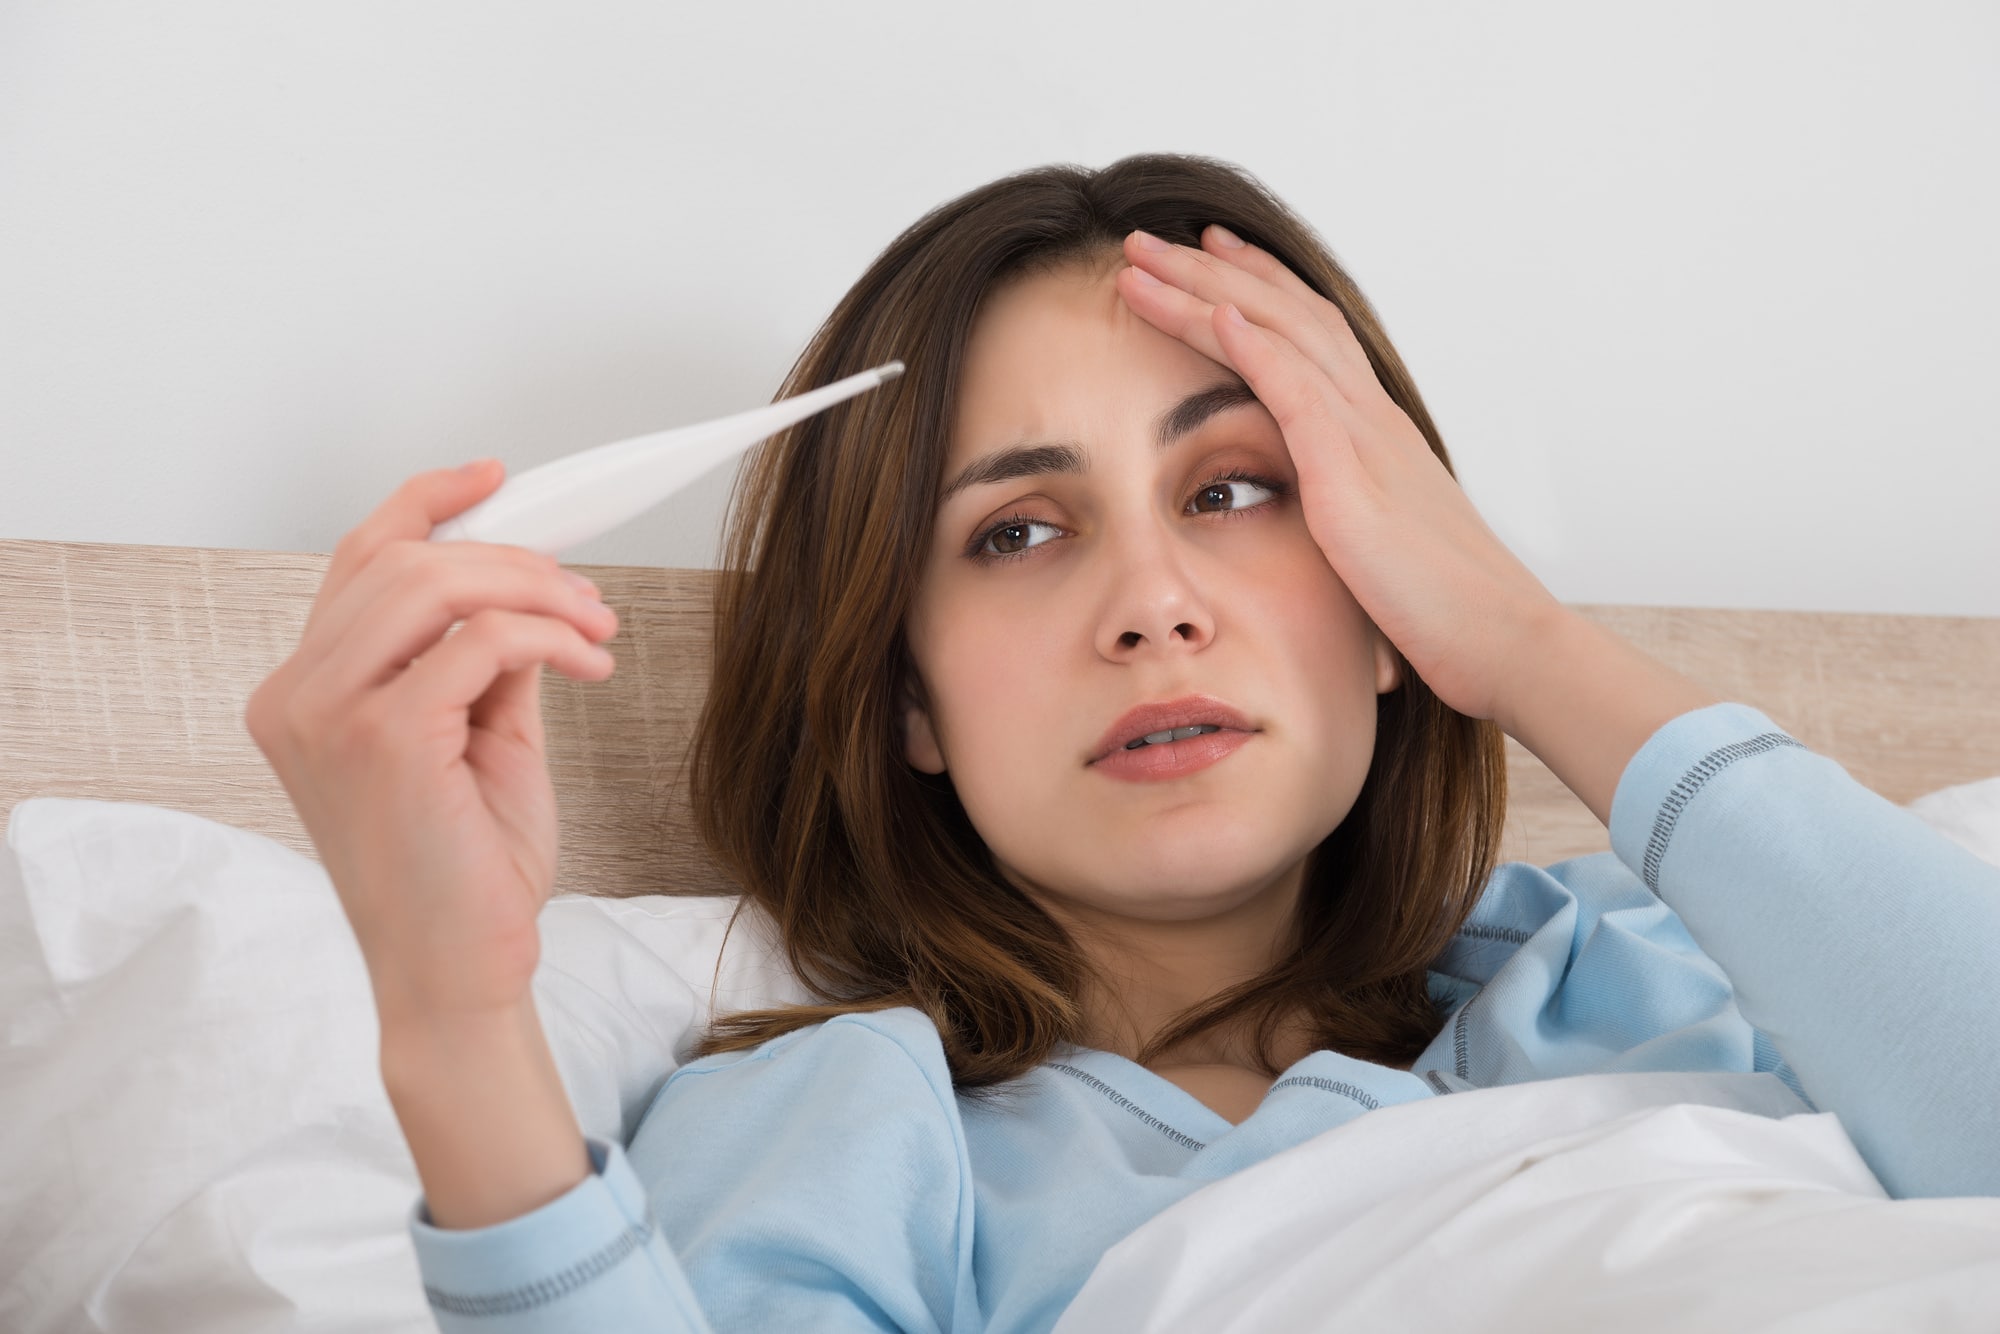 How to Tell if You Have a Fever: 5 Key Signs